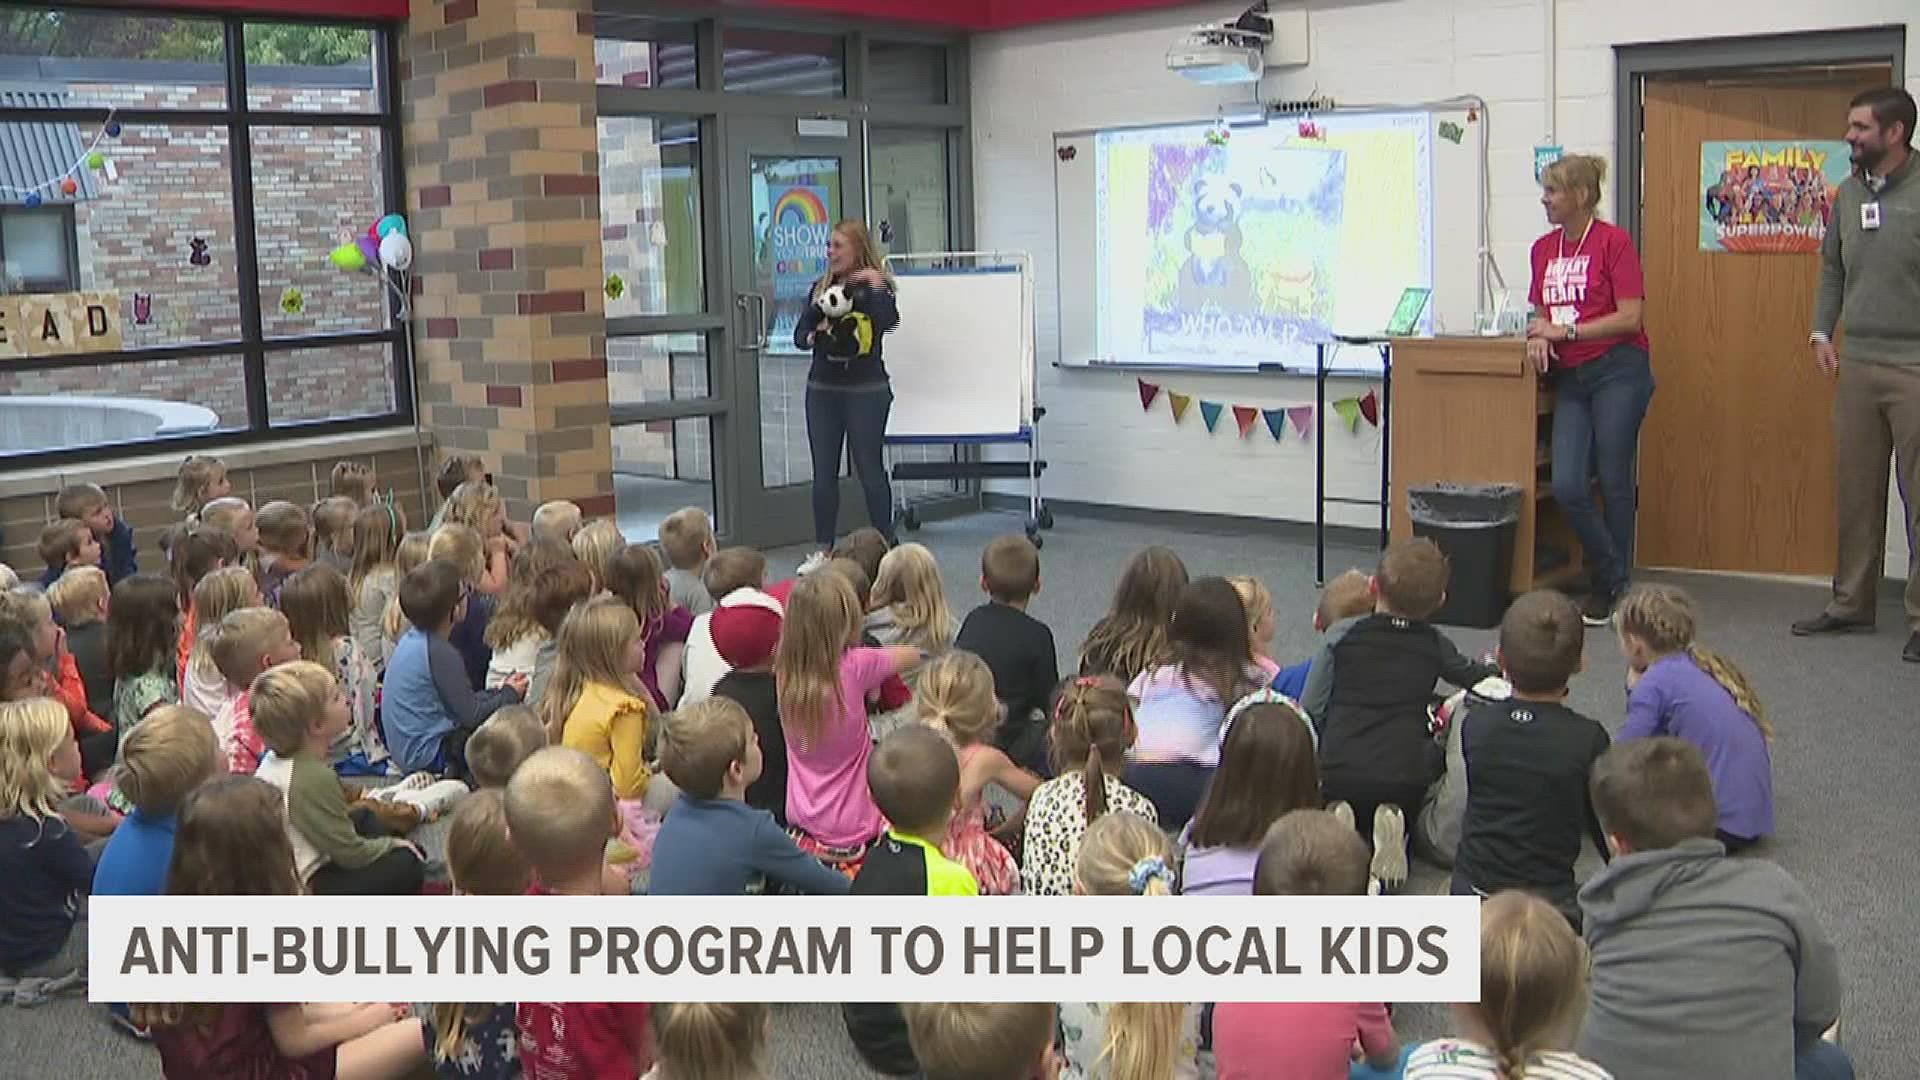 The program is traveling to kindergarten classrooms around the area presenting children's books and other anti-bullying material.